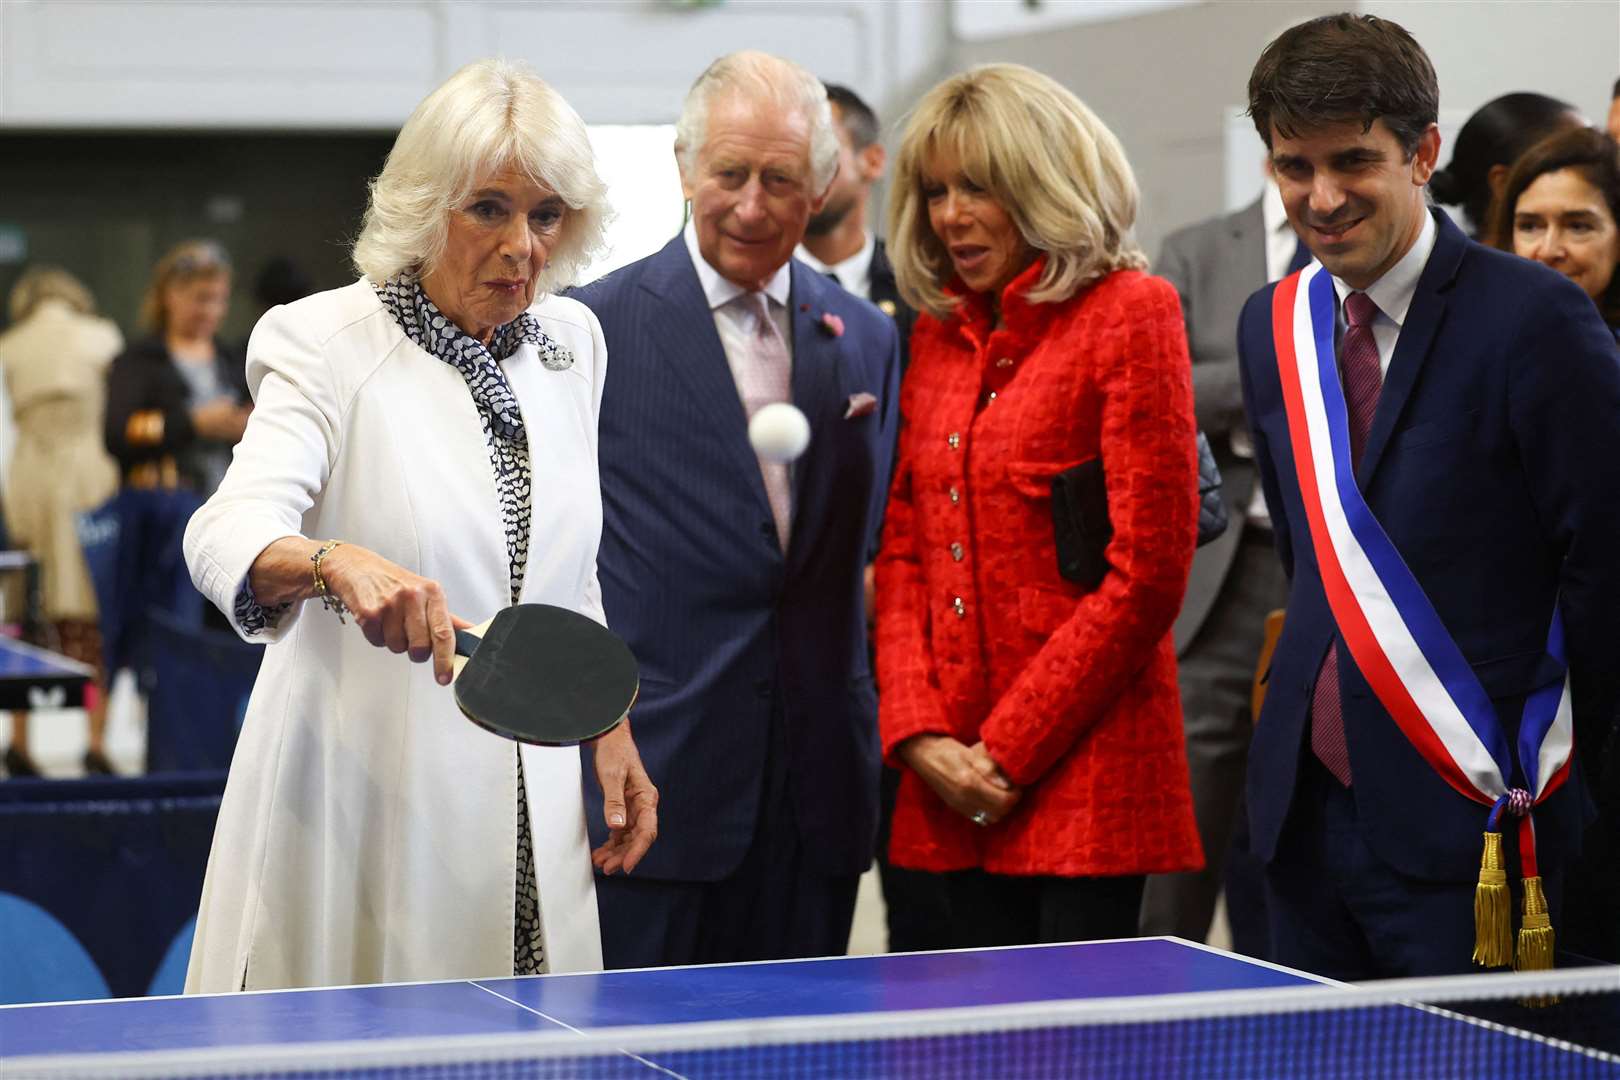 The Queen played table tennis next to the King and Brigitte Macron, during a visit to a local youth sports association in Saint-Denis (Hannah McKay/PA)